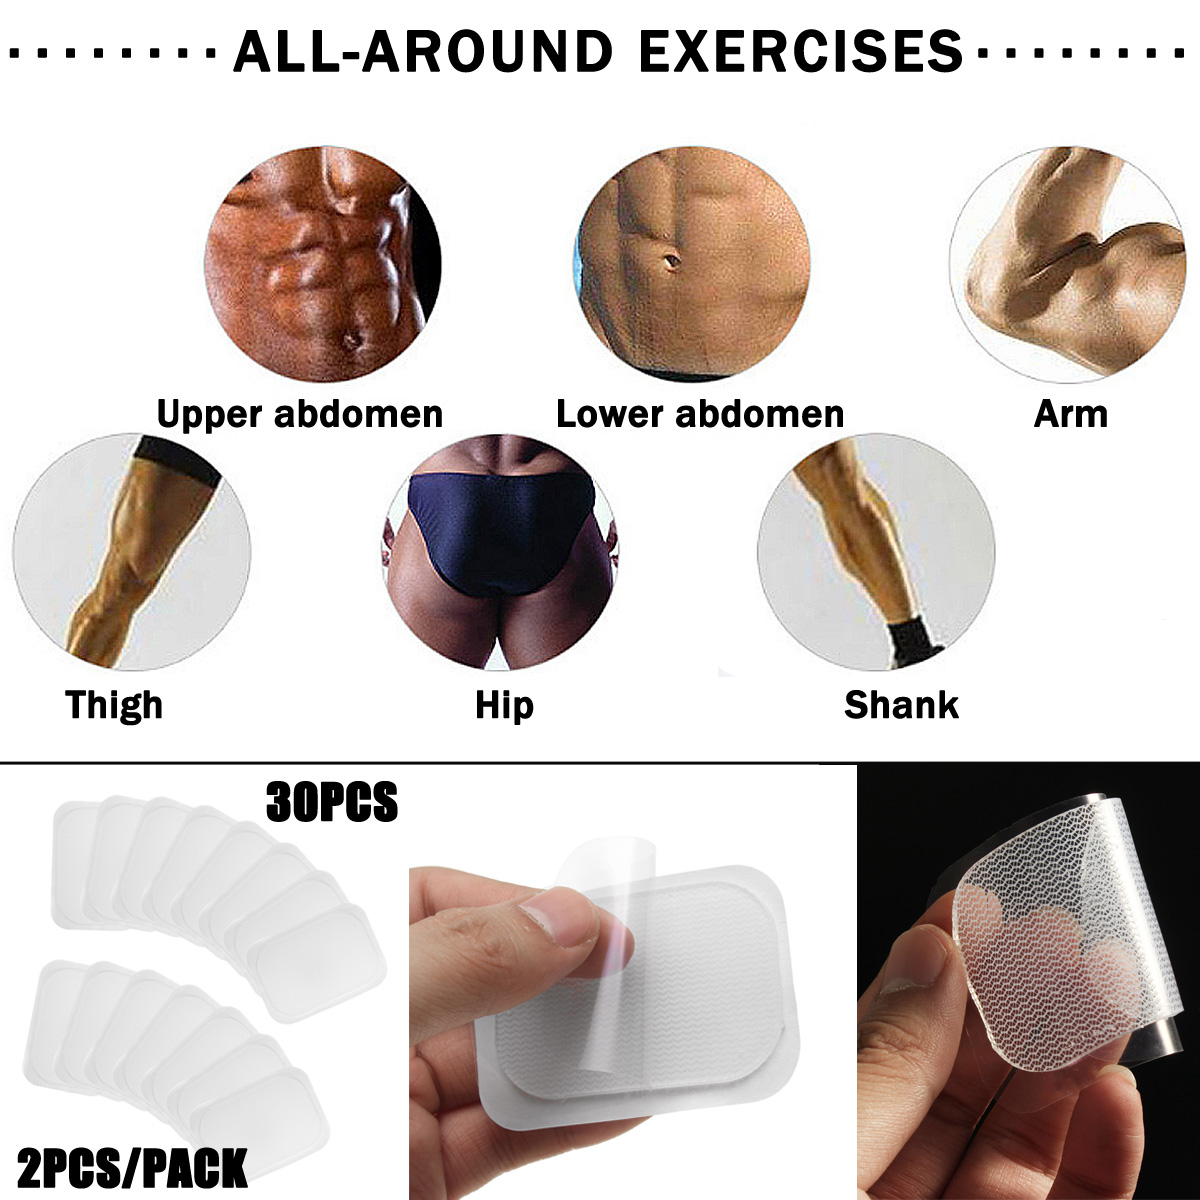 30Pcs-Replace-Gel-Sheet-Pads-For-Abdominal-Health-Stick-Muscle-Training-Fitness-Exerciser-ABS-Traine-1483562